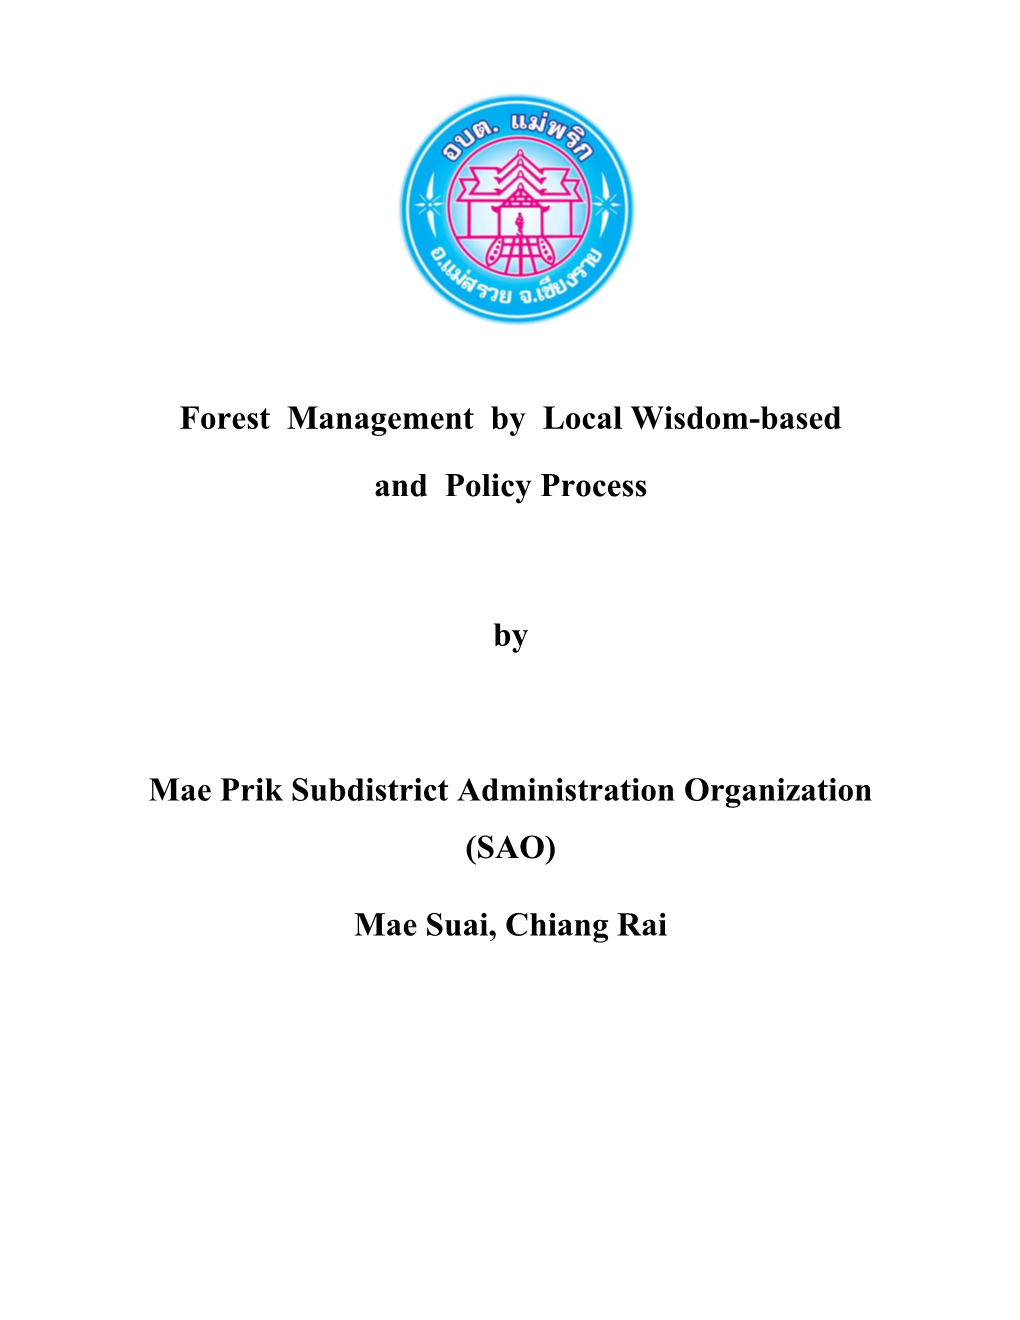 Forest Management by Local Wisdom-Based and Policy Process